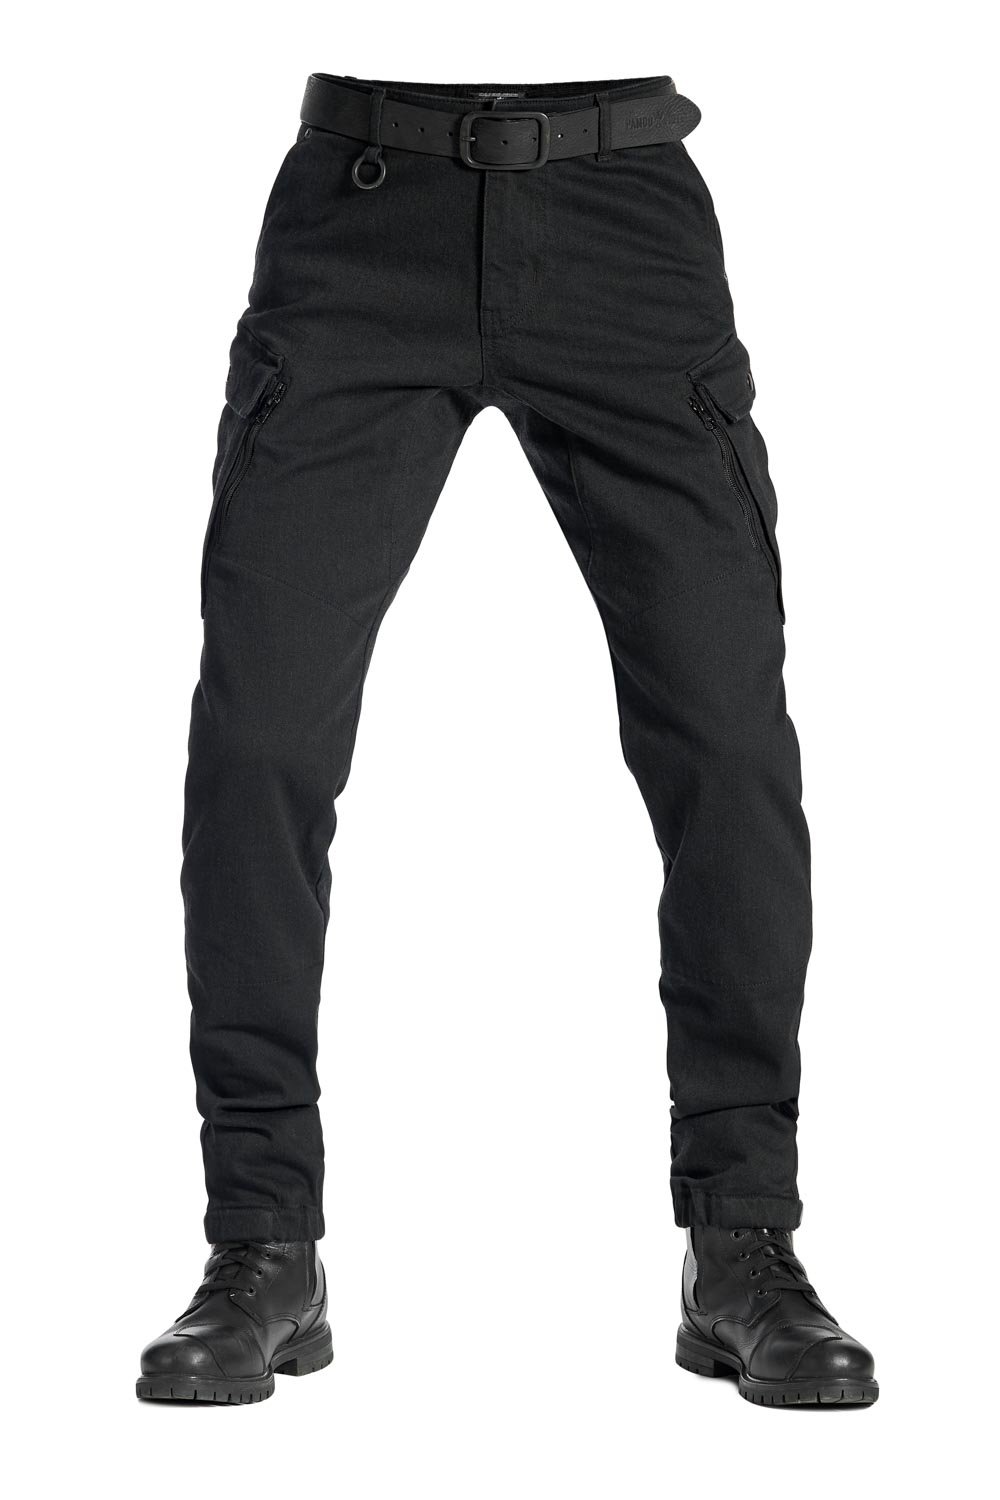 GBG Motorcycle Cargo Trouser Jeans Made With Kevlar Protective Lining Quality